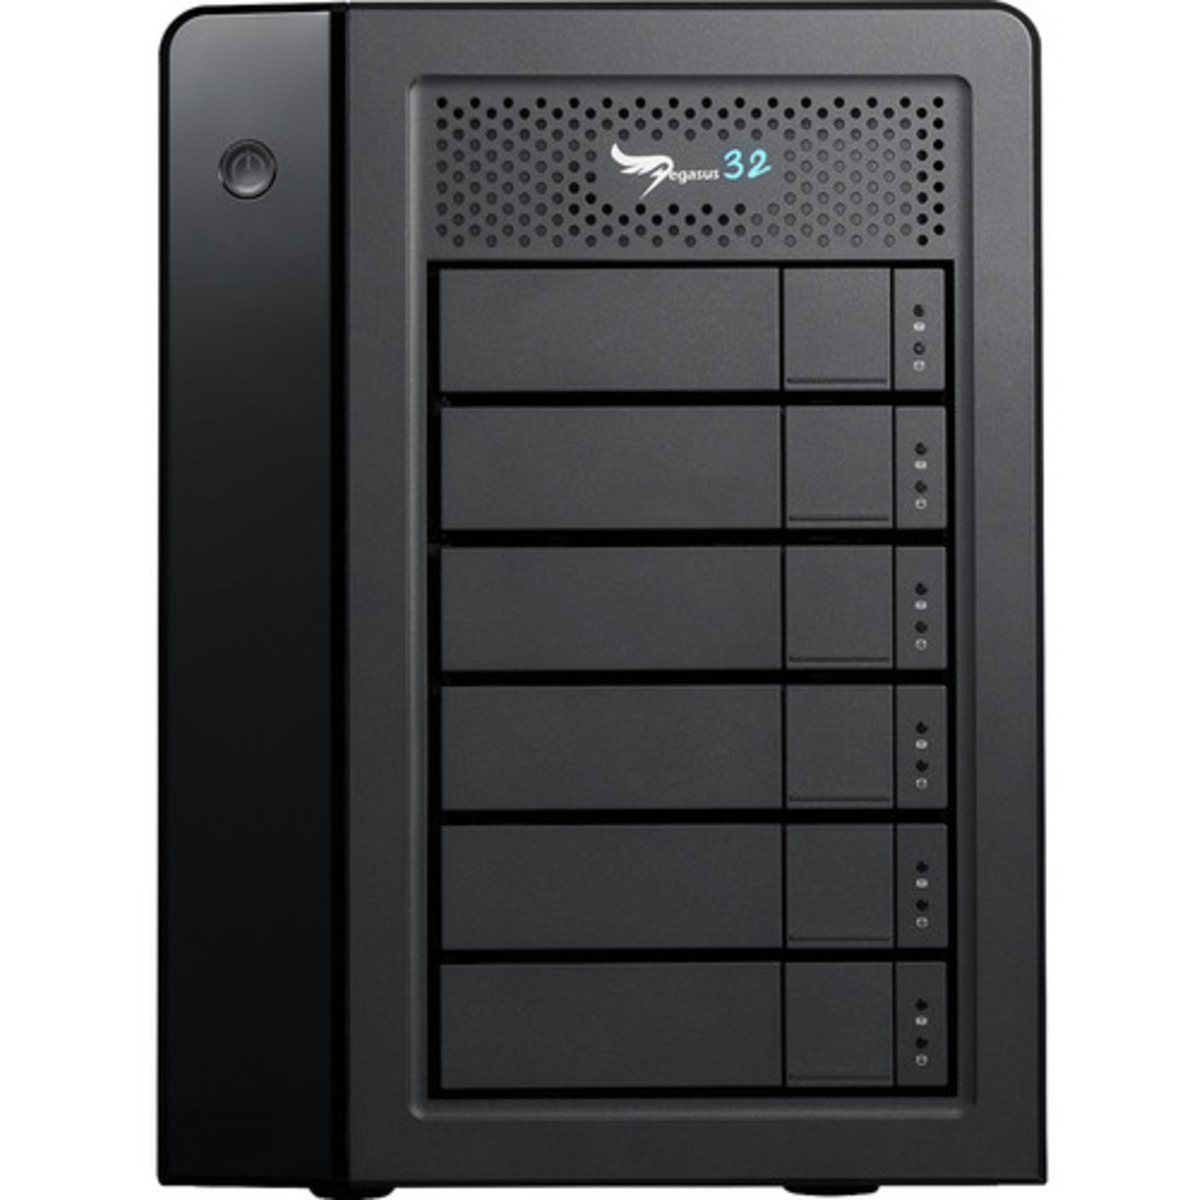 buy $2983 Promise Technology Pegasus32 R6 Thunderbolt 3 24tb Desktop DAS - Direct Attached Storage Device 6x4000gb Western Digital Blue WD40EZRZ 3.5 5400rpm SATA 6Gb/s HDD CONSUMER Class Drives Installed - Burn-In Tested - nas headquarters buy network attached storage server device das new raid-5 free shipping usa christmas new year holiday sale Pegasus32 R6 Thunderbolt 3